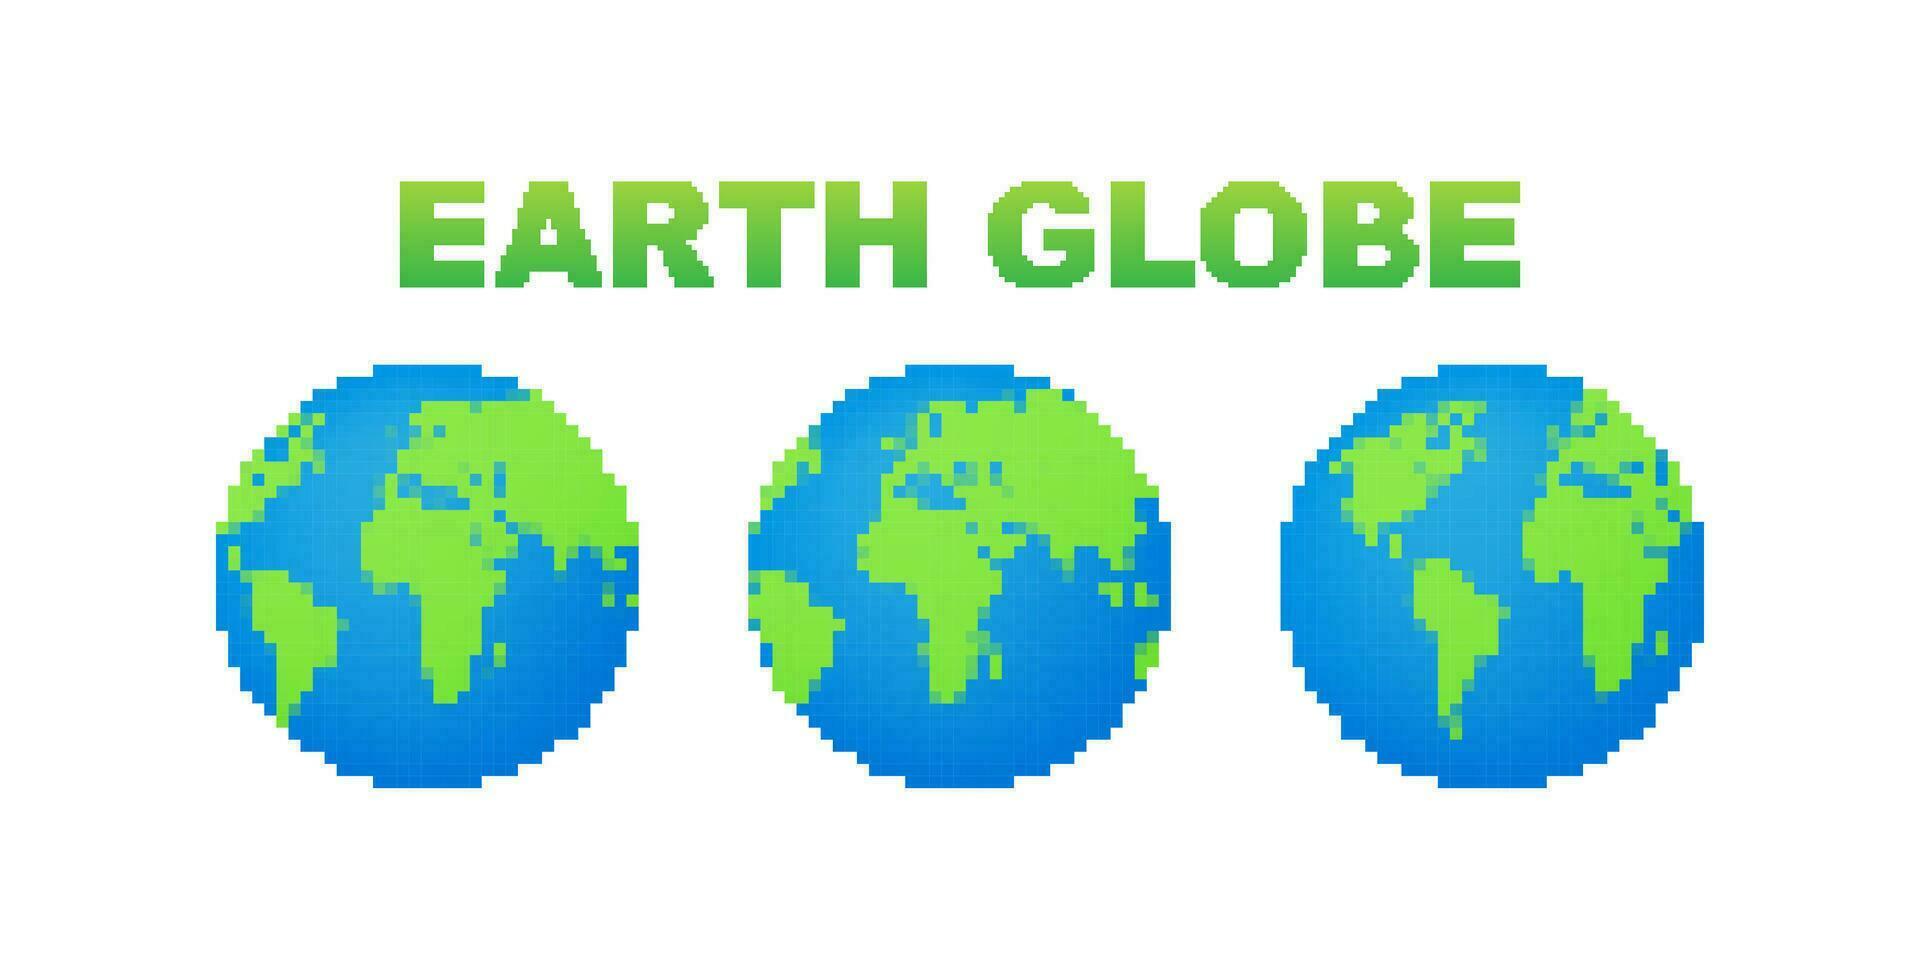 Set Earth globes isolated on white background. Pixel style planet Earth icon. Vector stock illustration